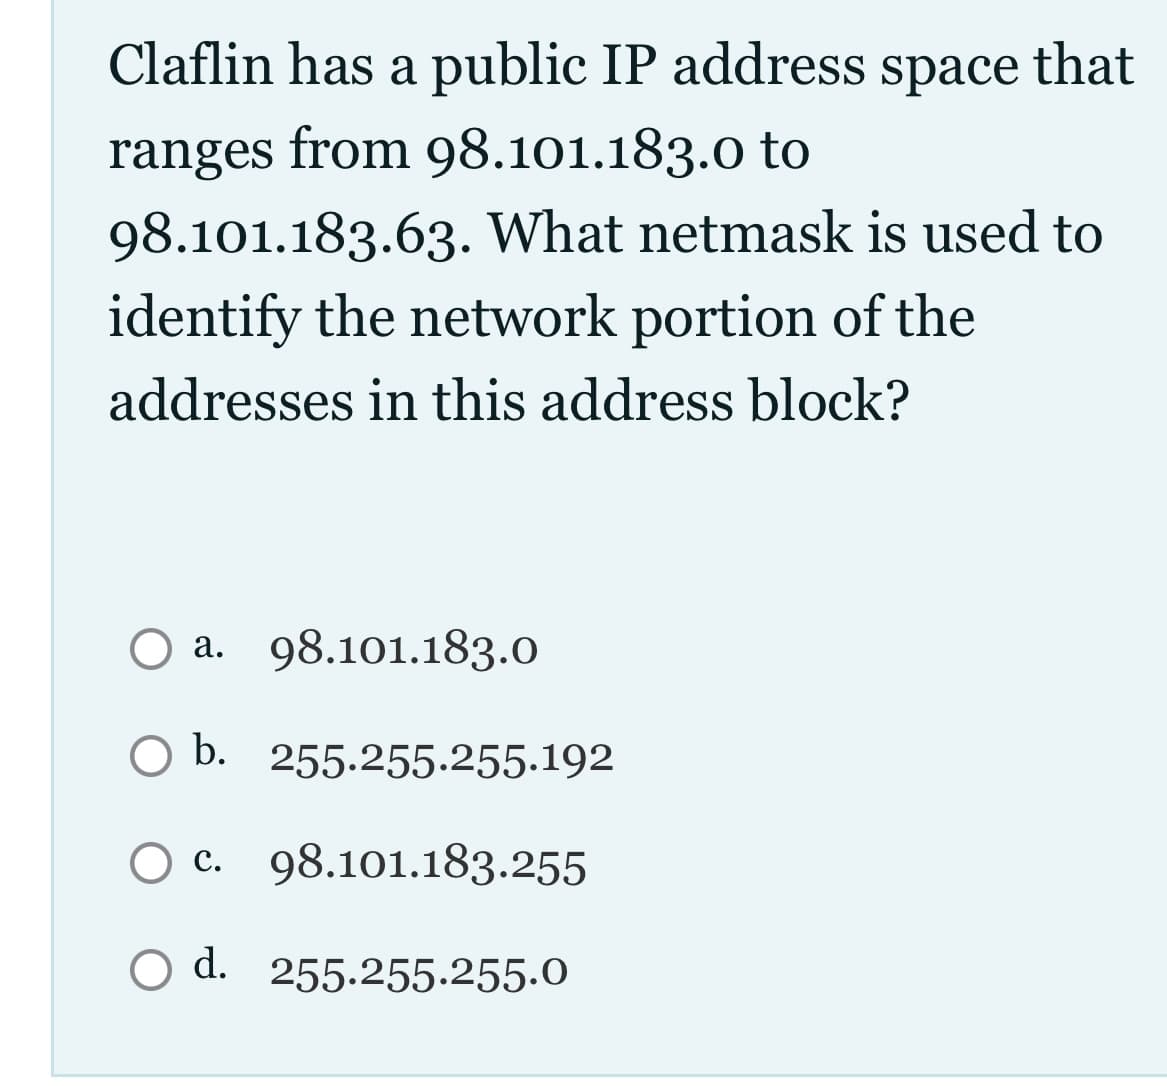 Claflin has a public IP address space that
ranges from 98.101.183.0 to
98.101.183.63. What netmask is used to
identify the network portion of the
addresses in this address block?
O a. 98.101.183.0
O b. 255.255.255.192
c. 98.101.183.255
d. 255.255.255.0
